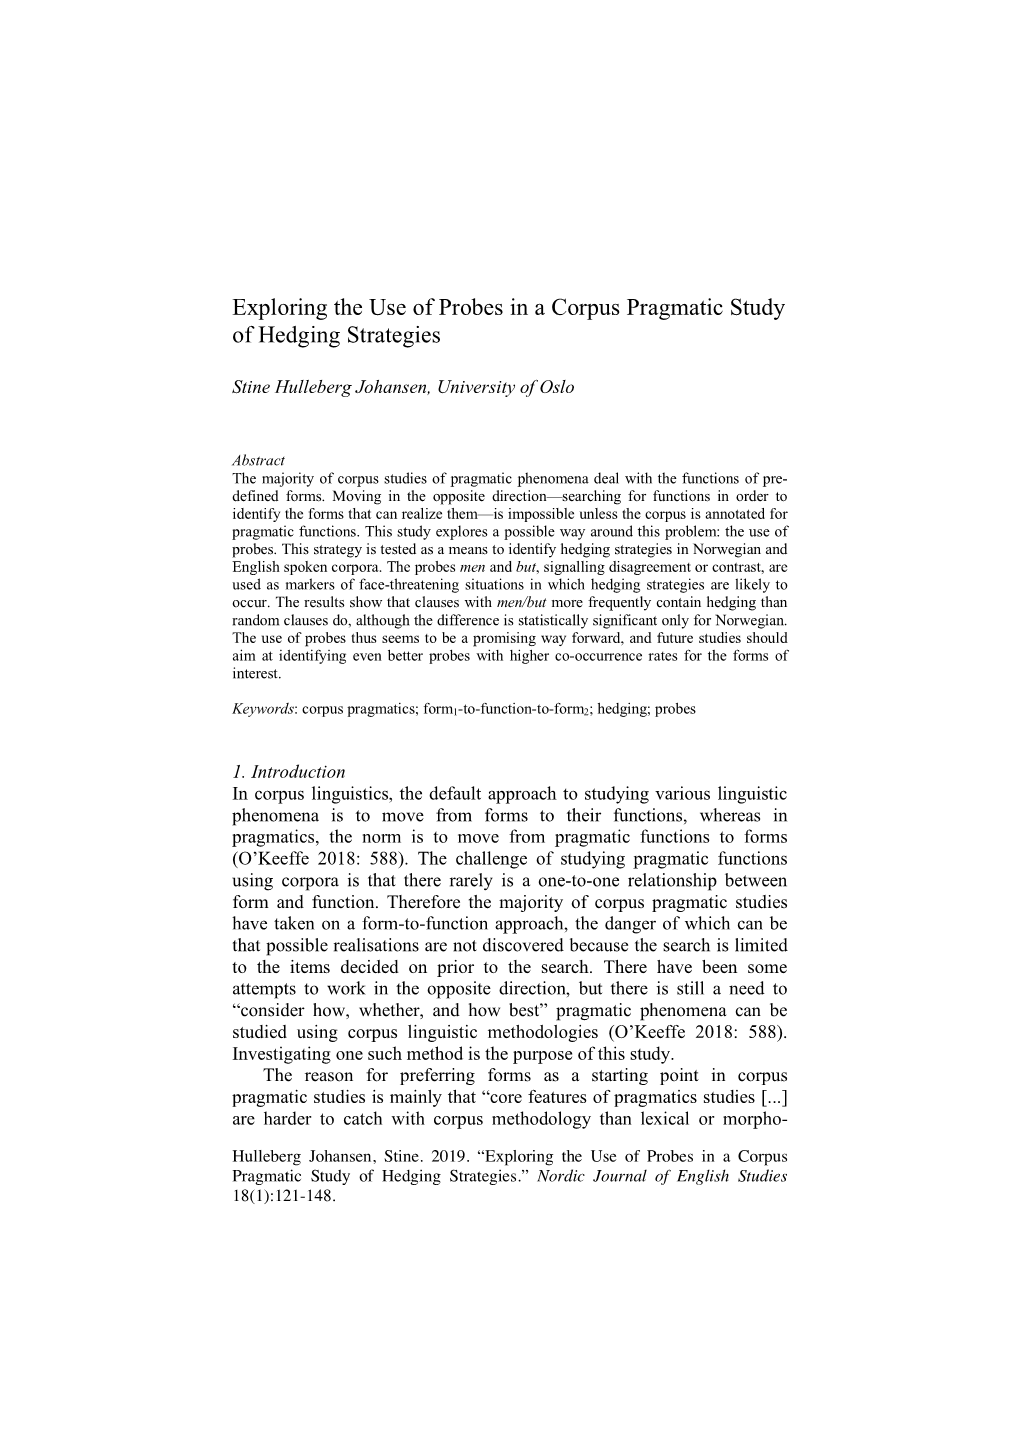 Exploring the Use of Probes in a Corpus Pragmatic Study of Hedging Strategies